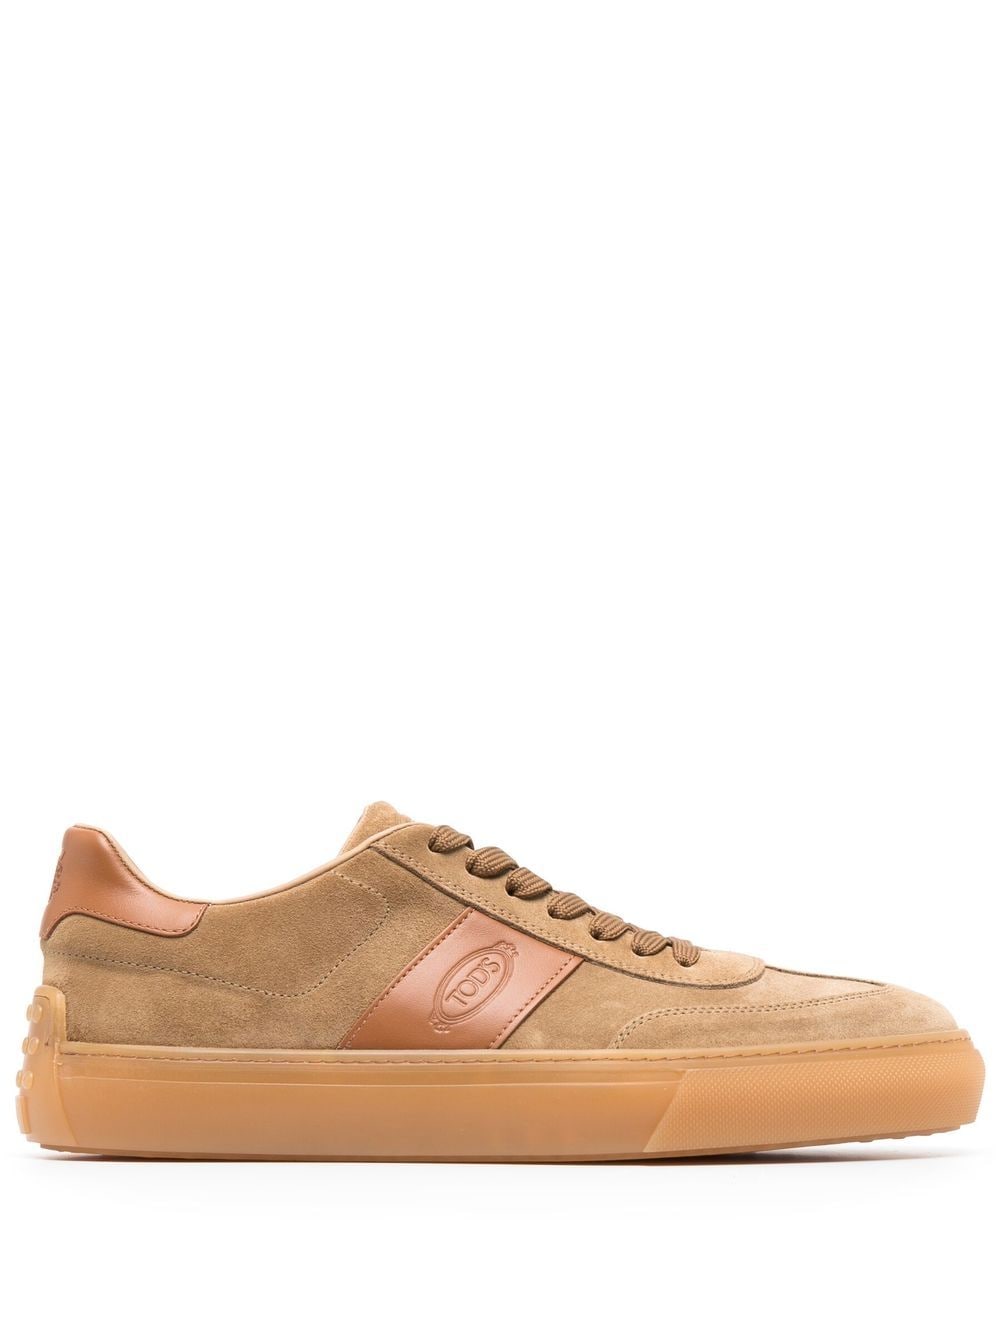 TOD'S SUEDE LEATHER Sneaker